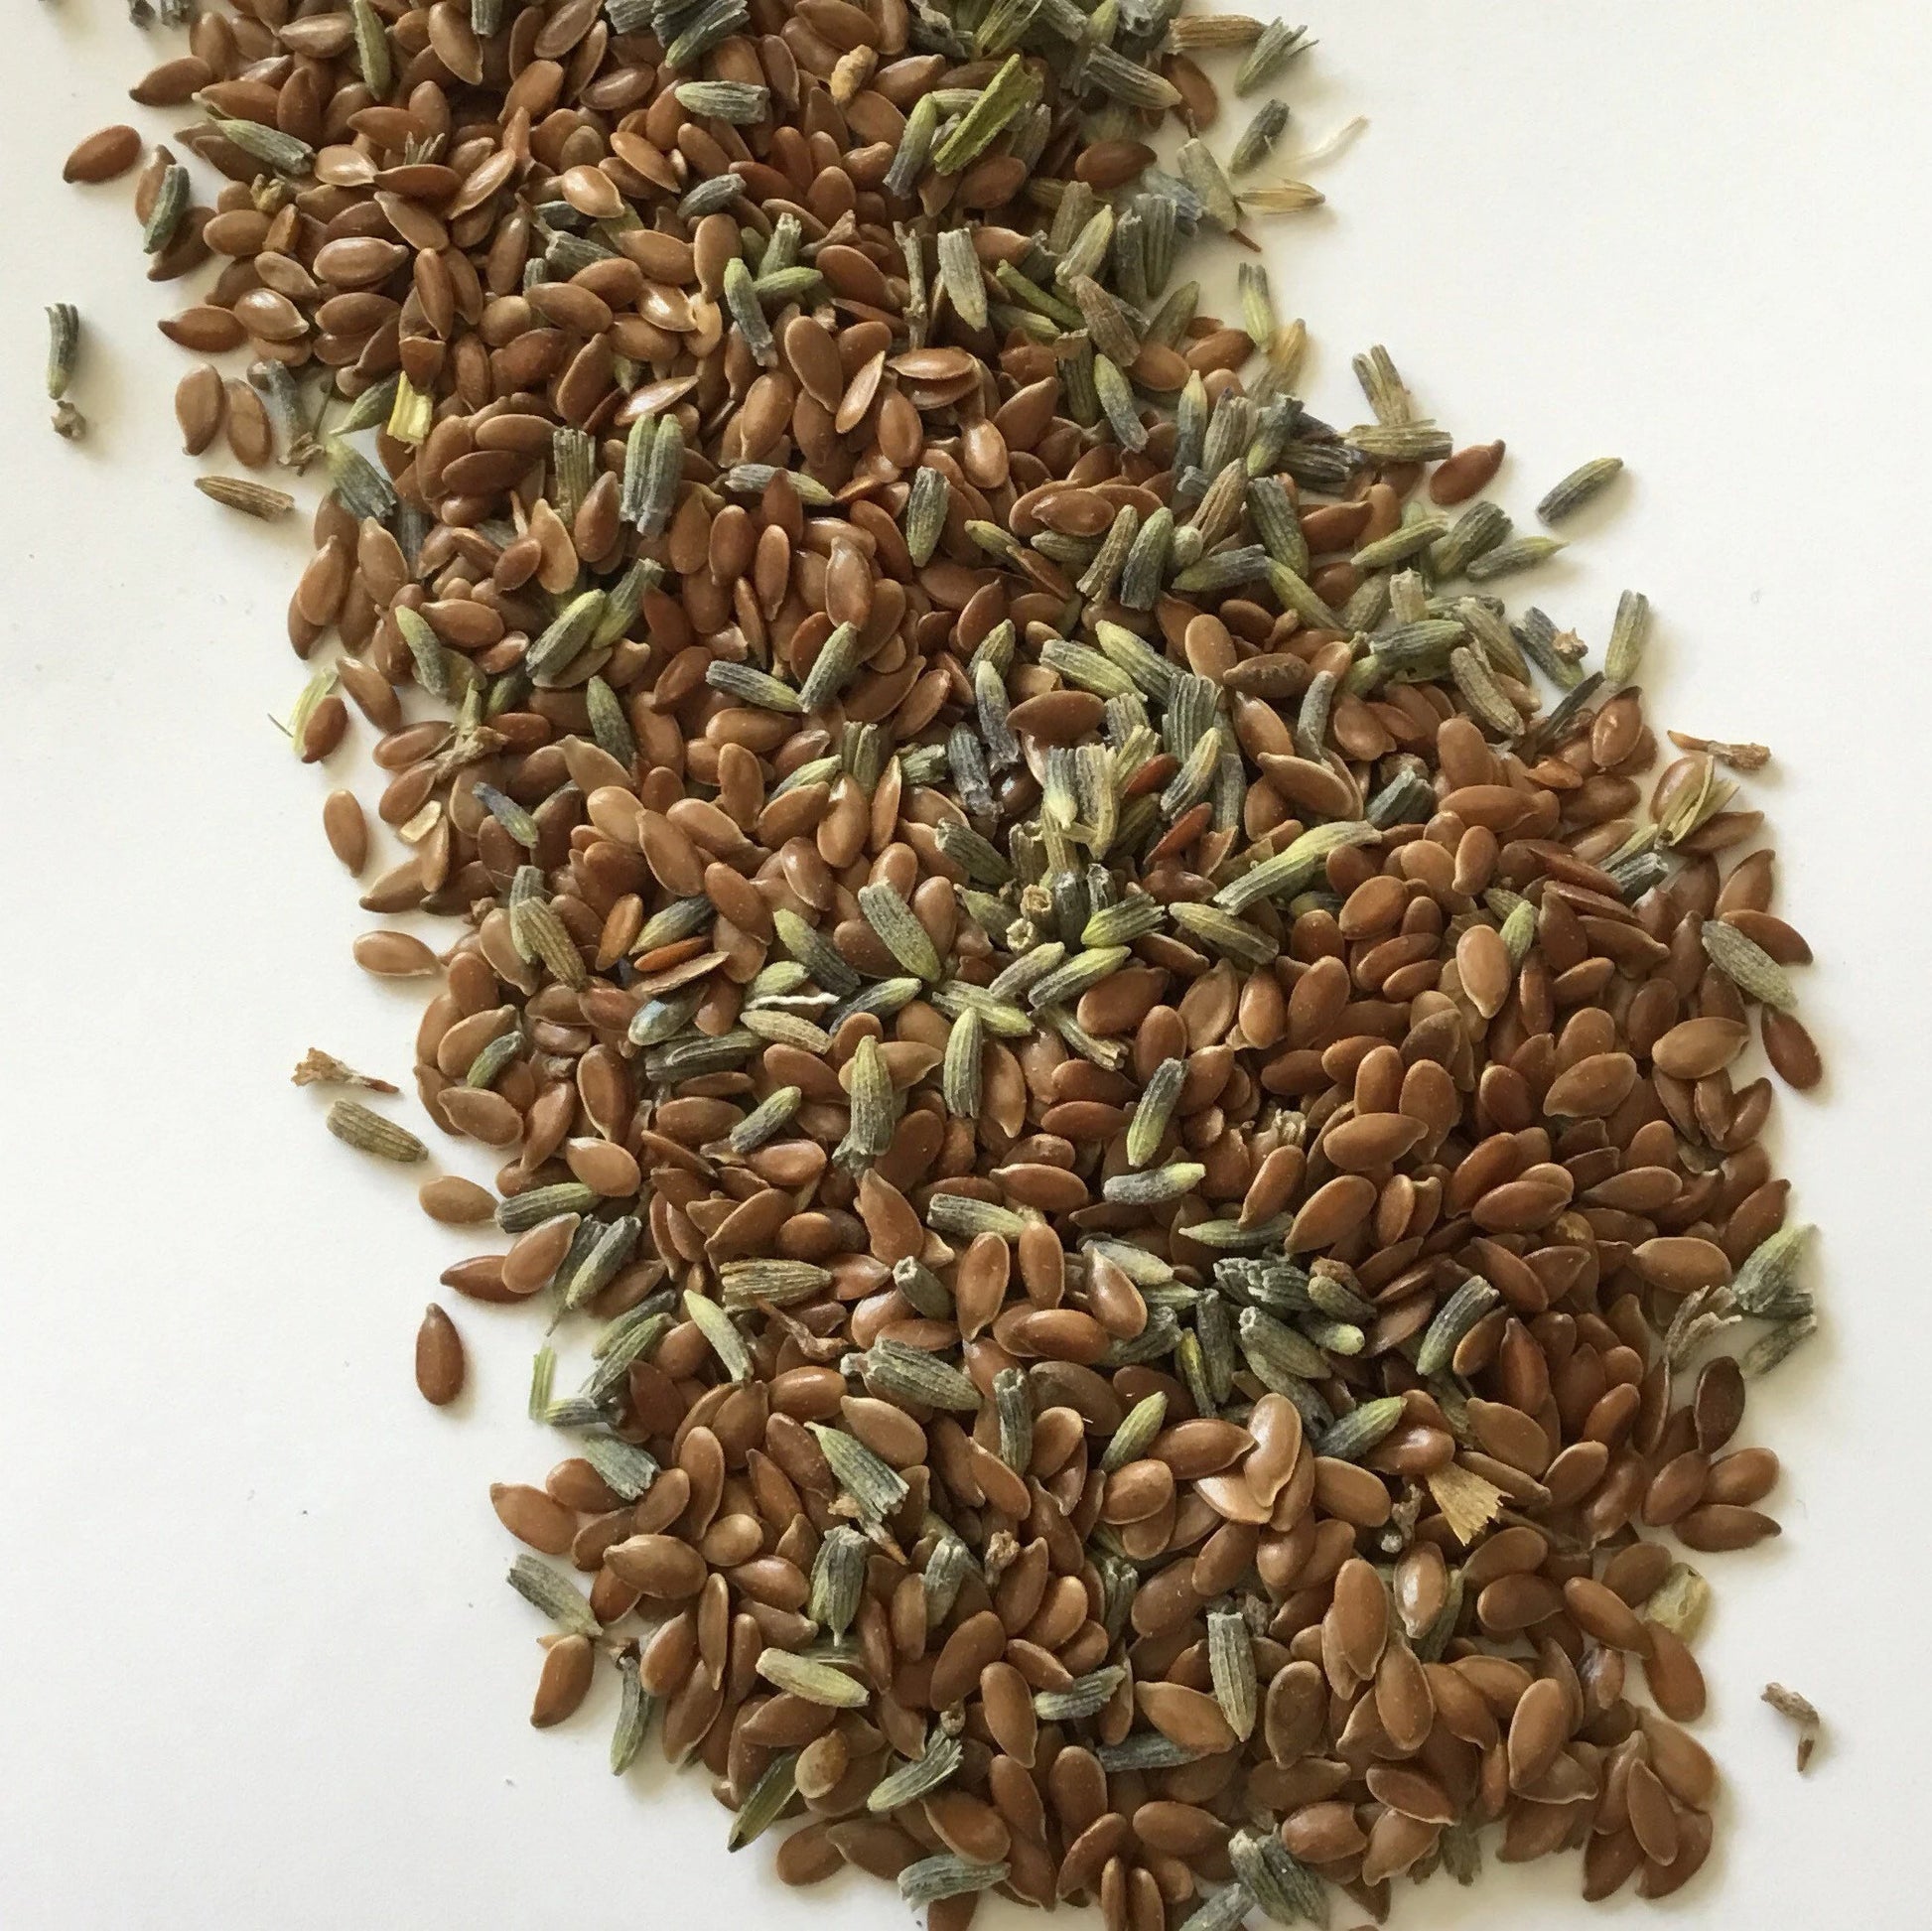 organic brown flax seed and lavender mix used for wheat bag heaven eye pillows and sleep masks